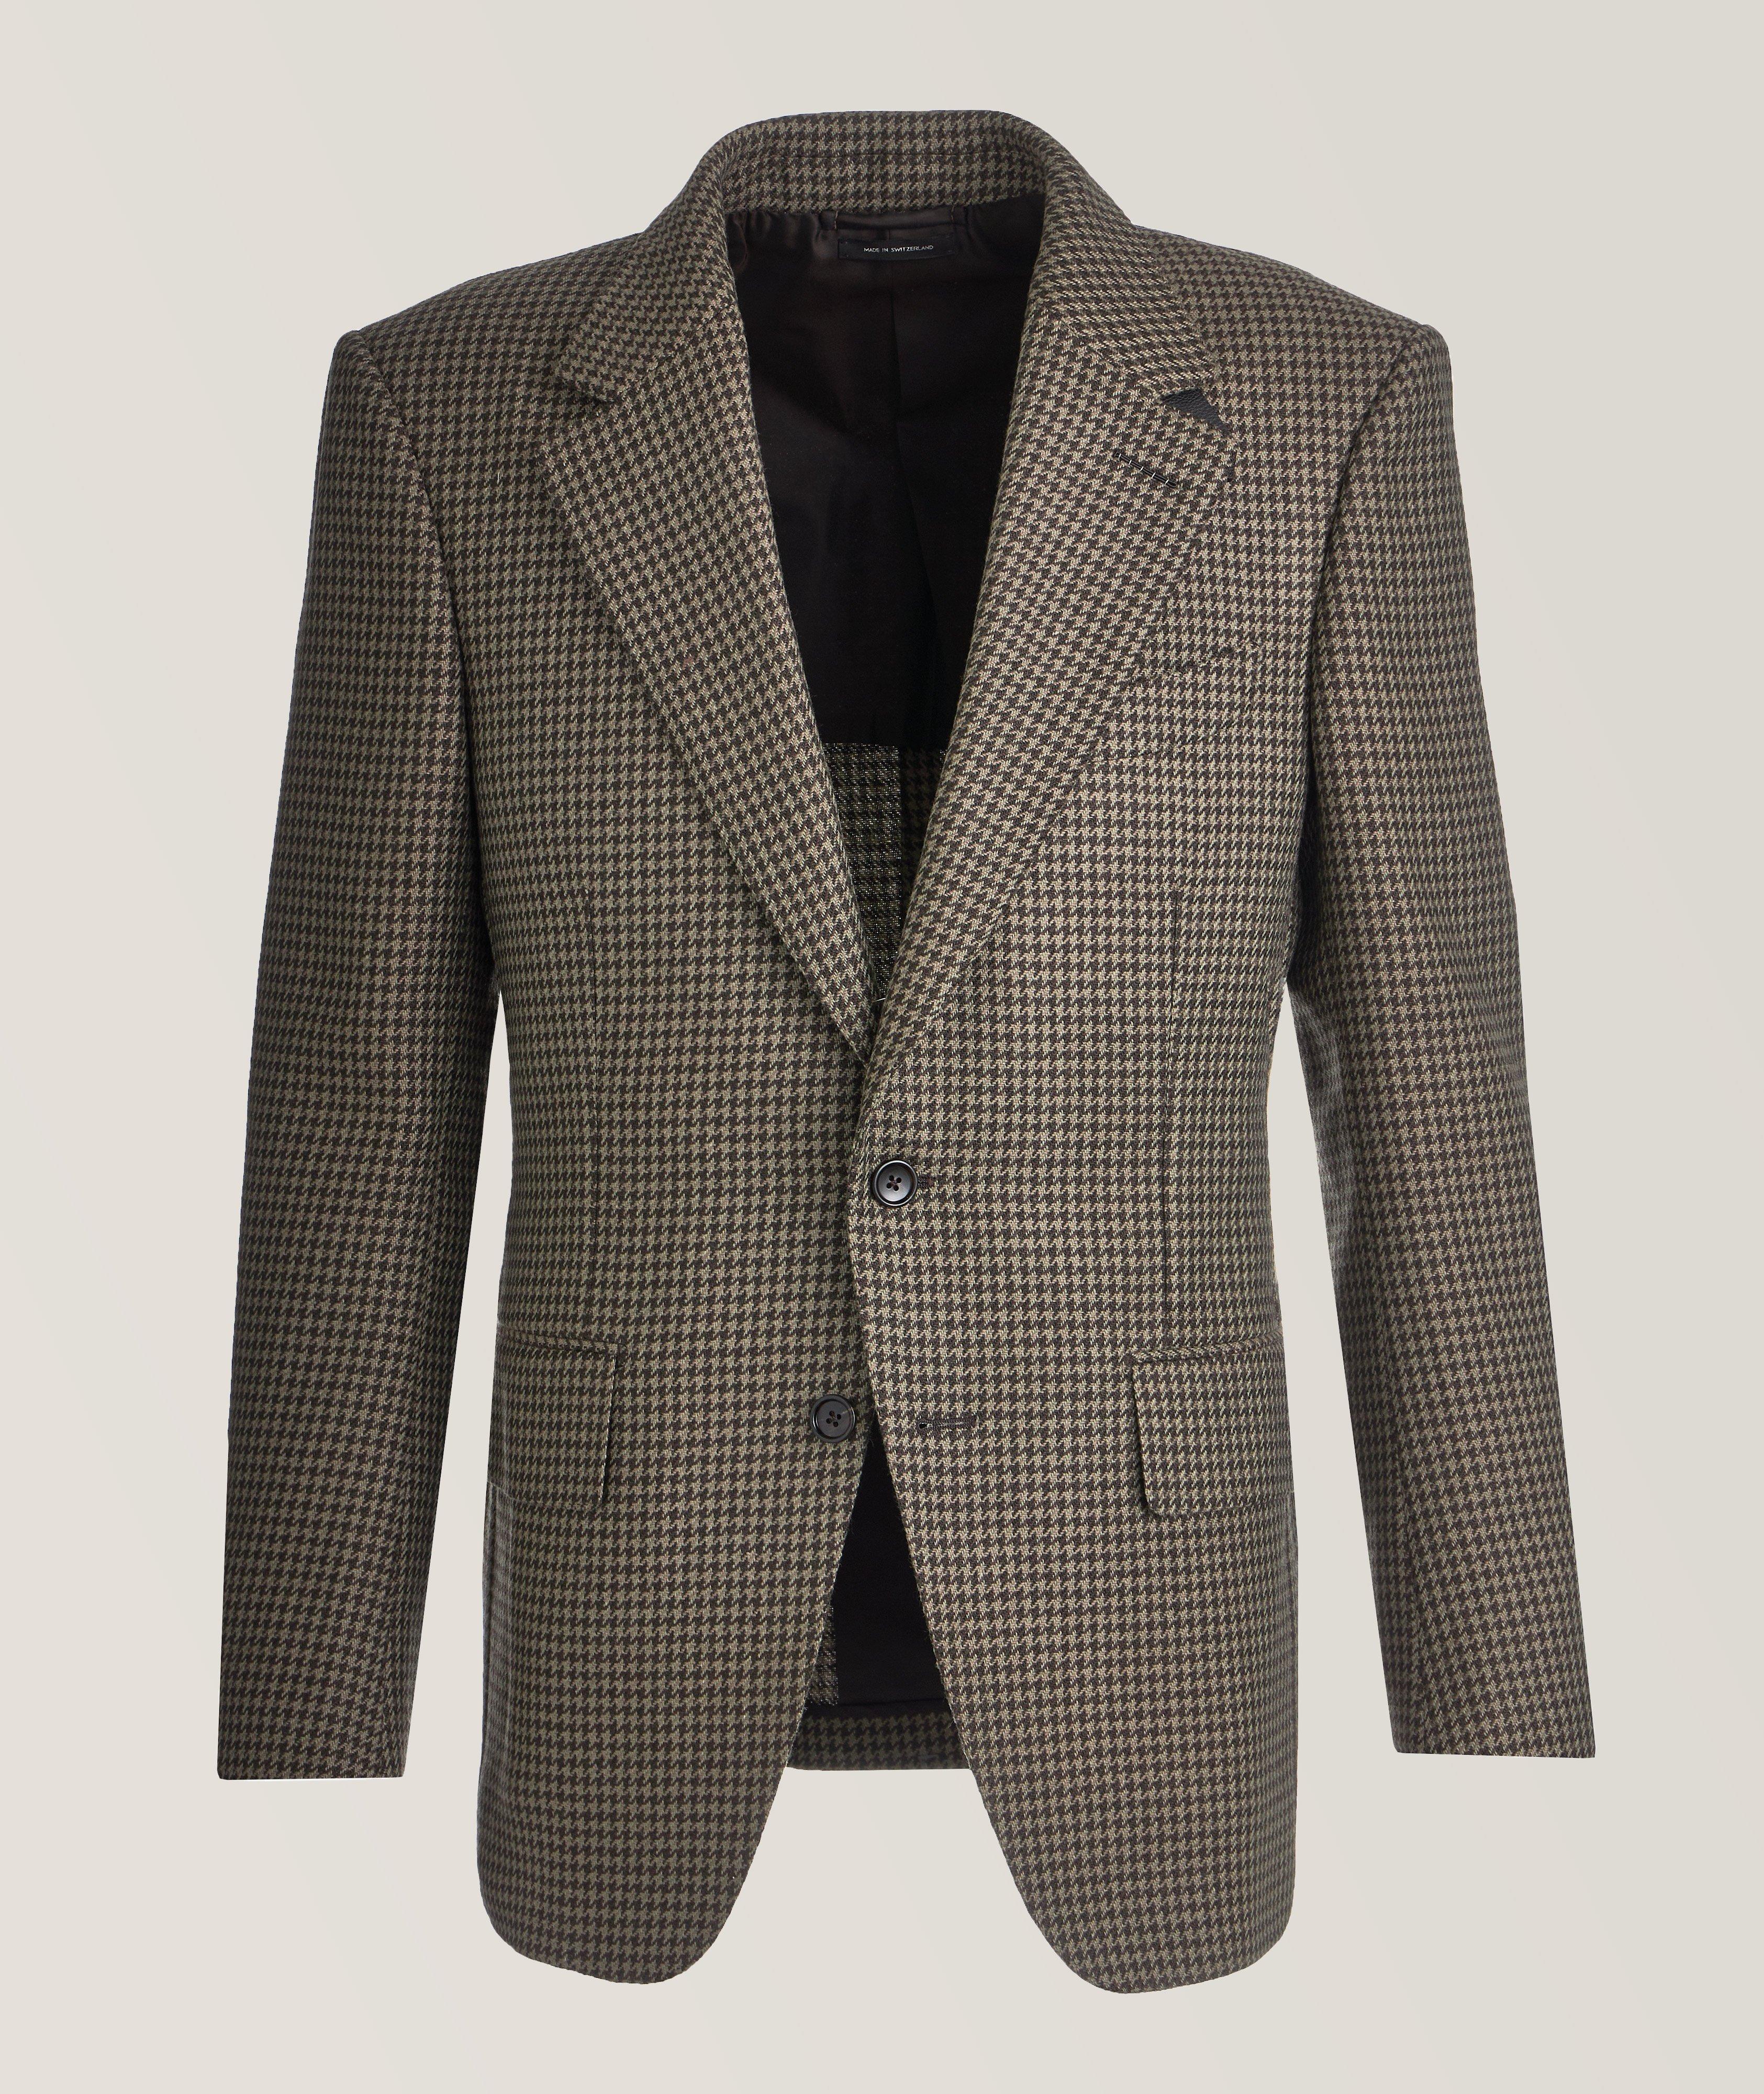 Atticus Houndstooth Wool, Mohair & Cashmere Sport Jacket image 0